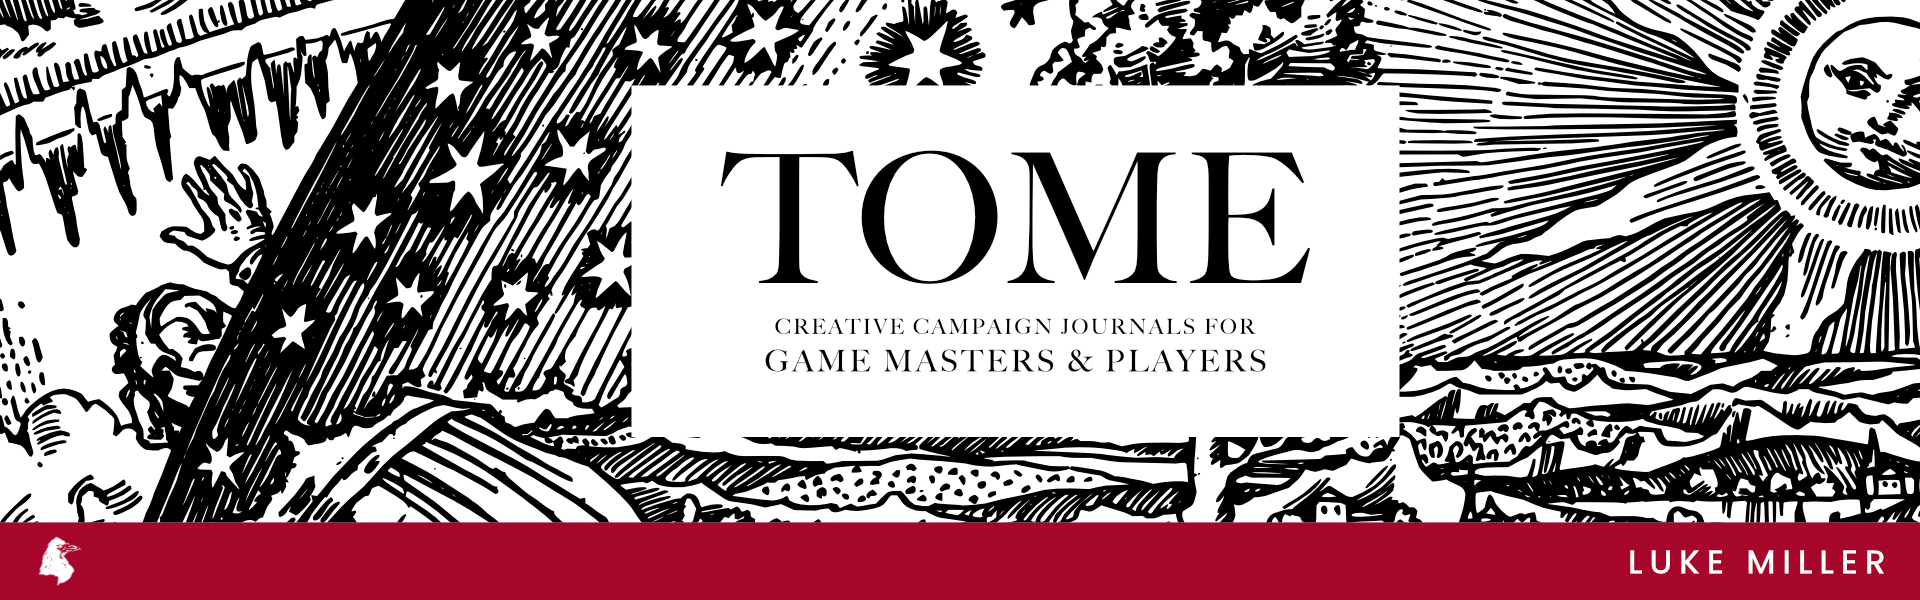 Tome for Game Masters, Volume 1